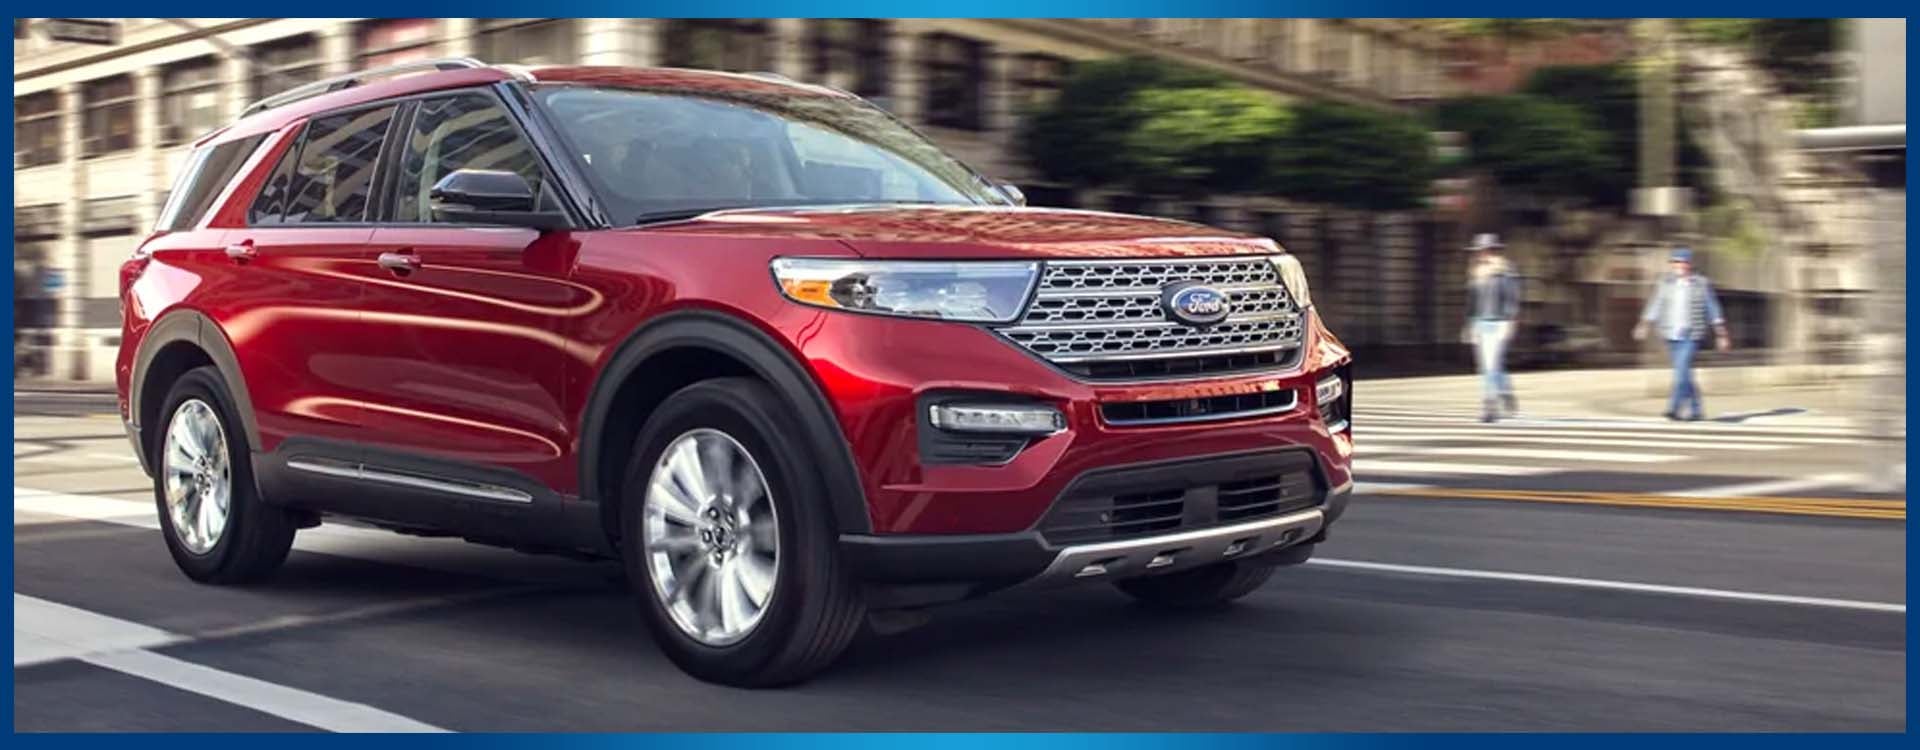 2021 Ford Explorer Towing Capacity, Configurations & Specs